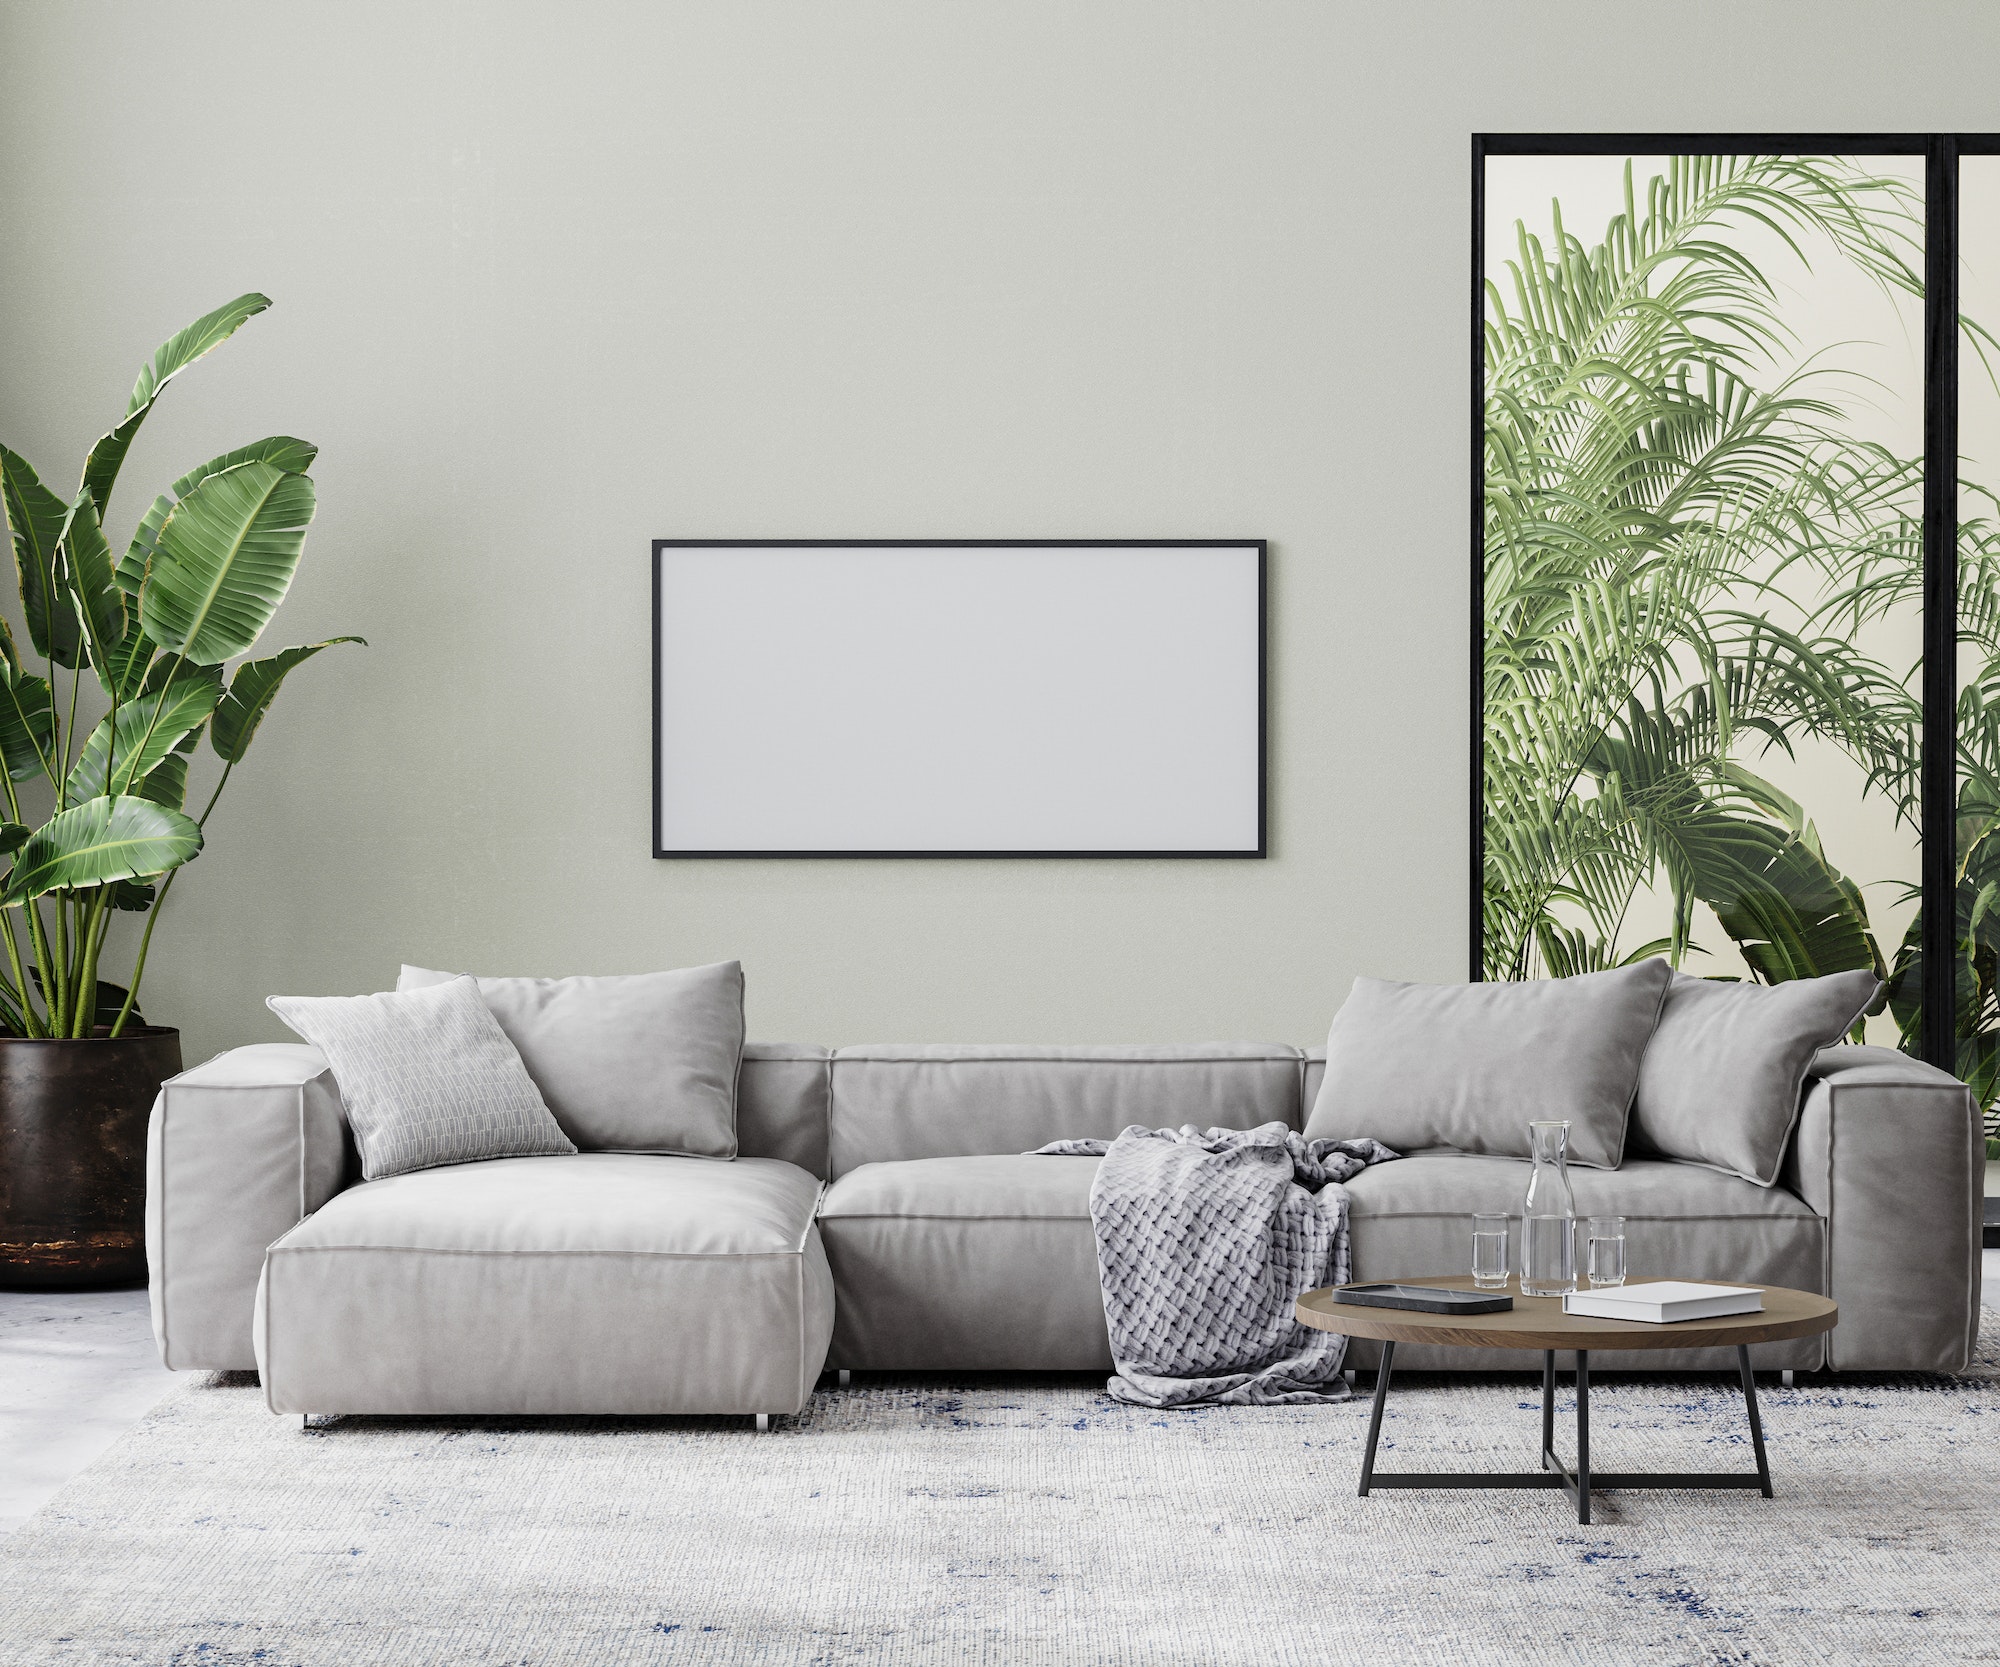 horizontal picture frame in living room interior mock up in gray tones with tropical palm